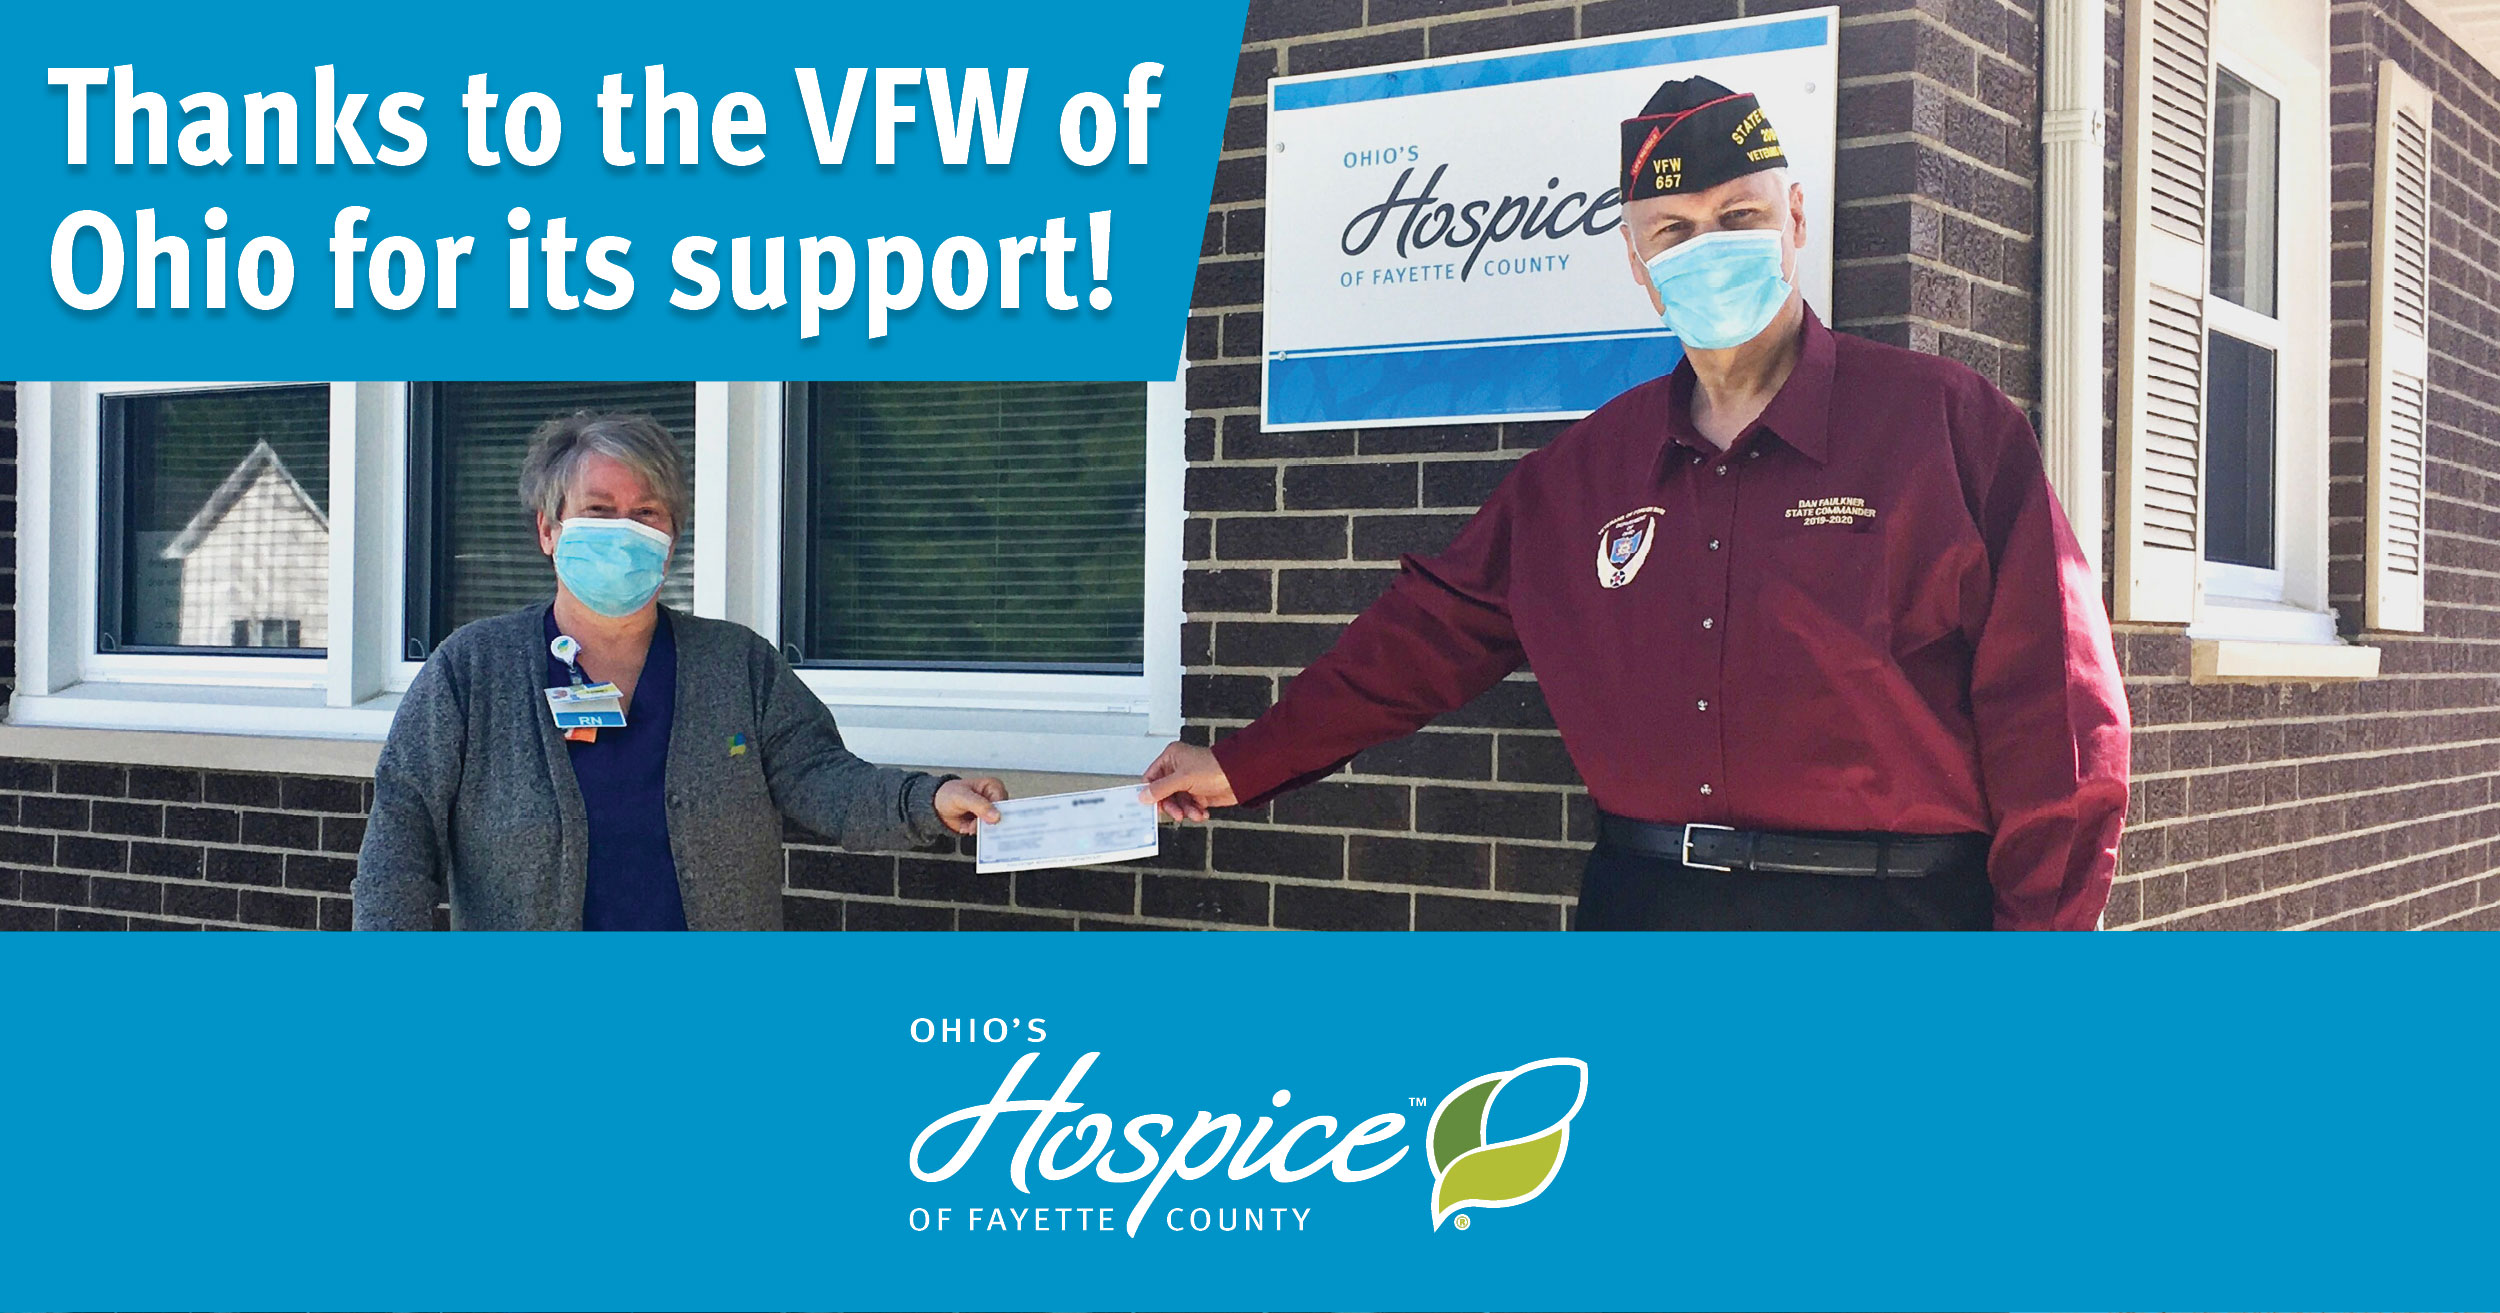 VFW Awards Grant to Ohio's Hospice of Fayette County